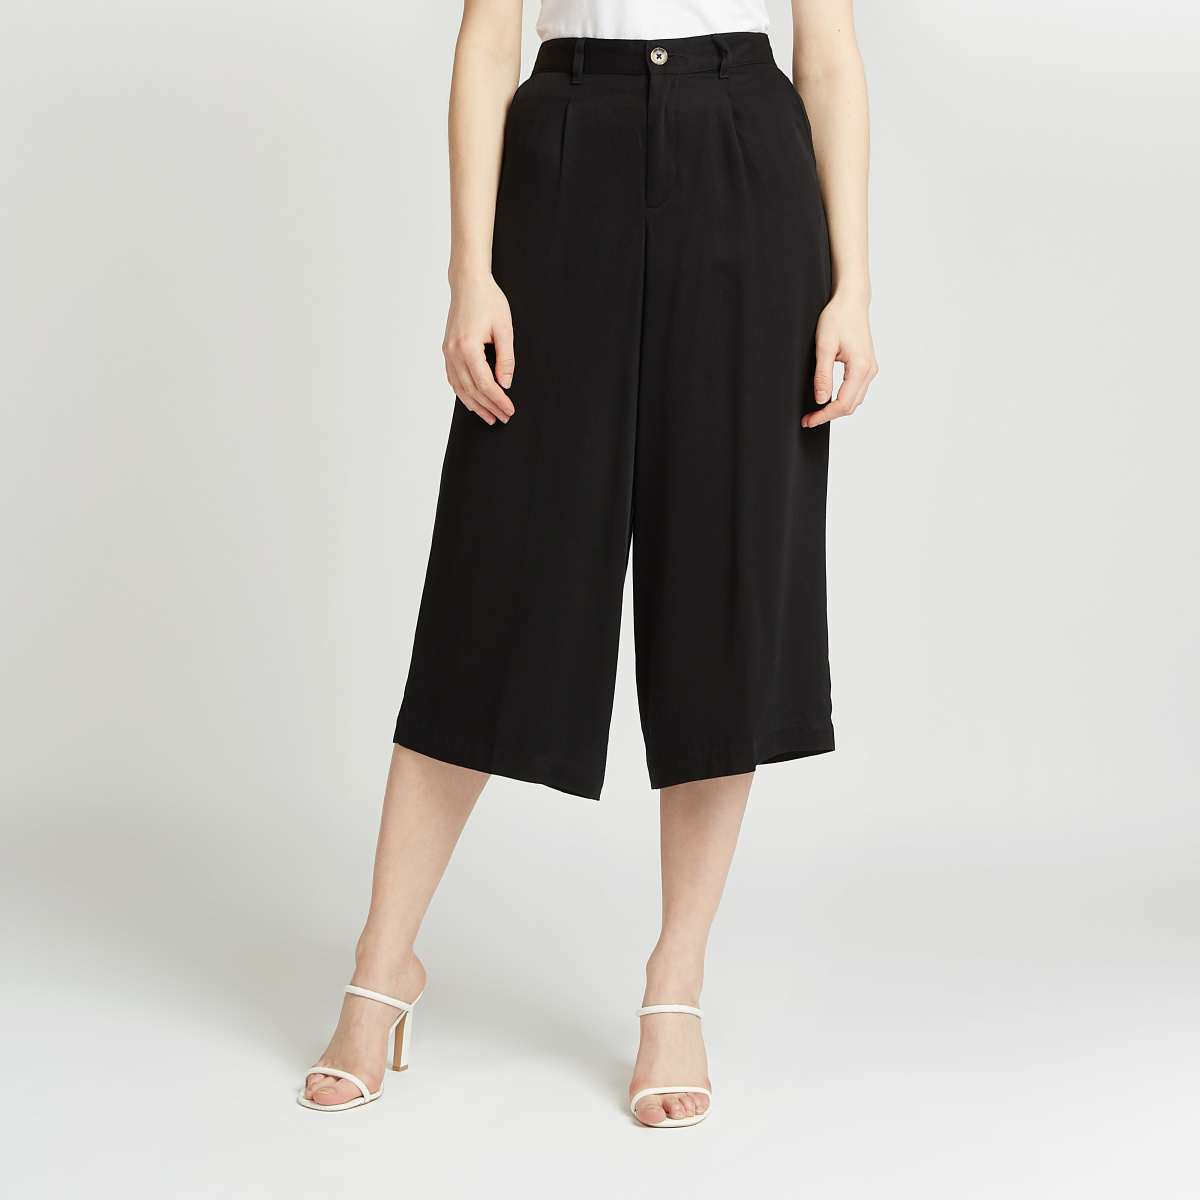 unisex Cyclone Drapped 3/4 Trousers